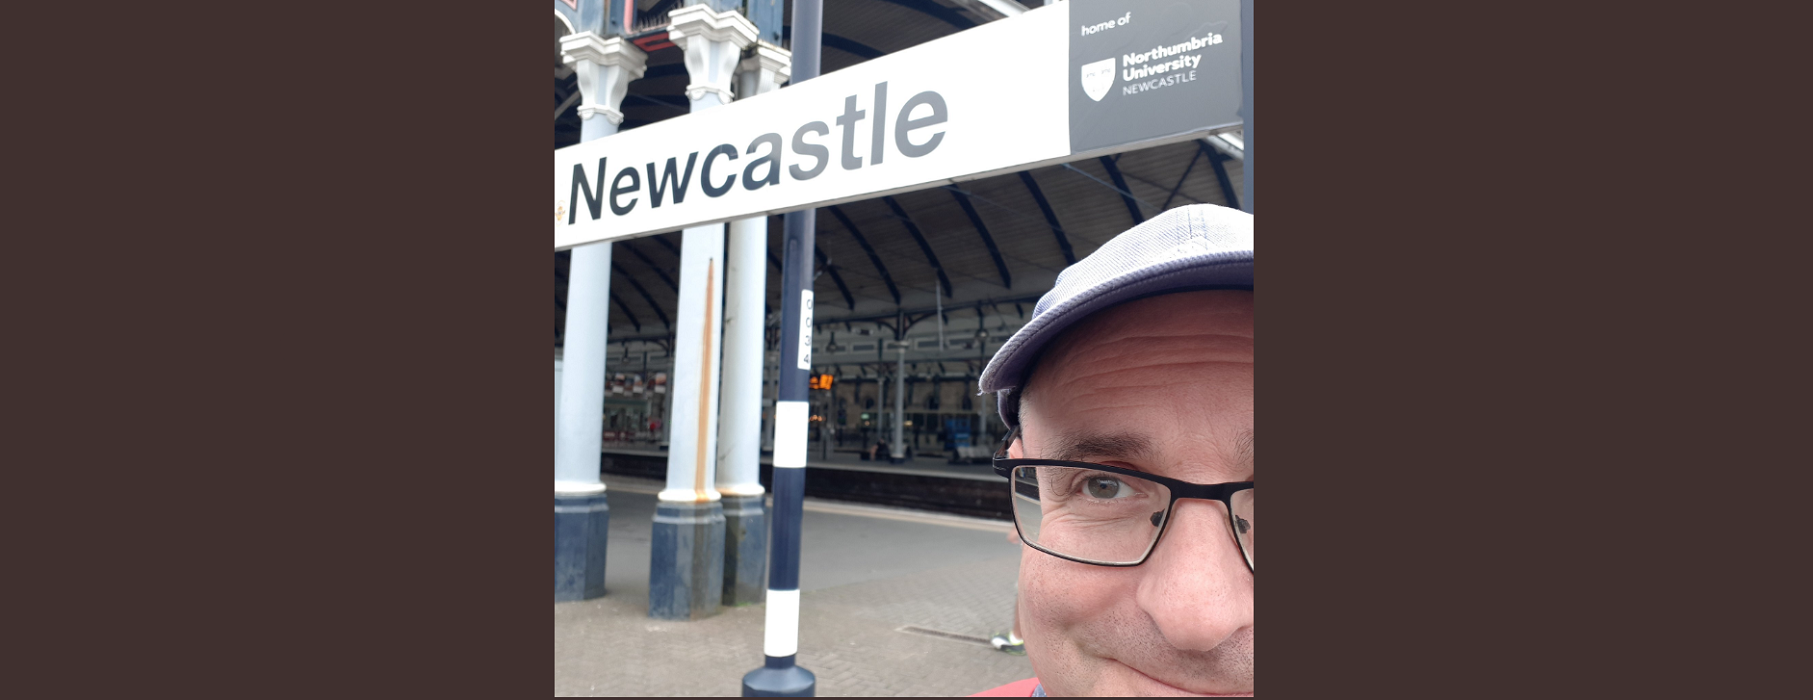 arriving in Newcastle